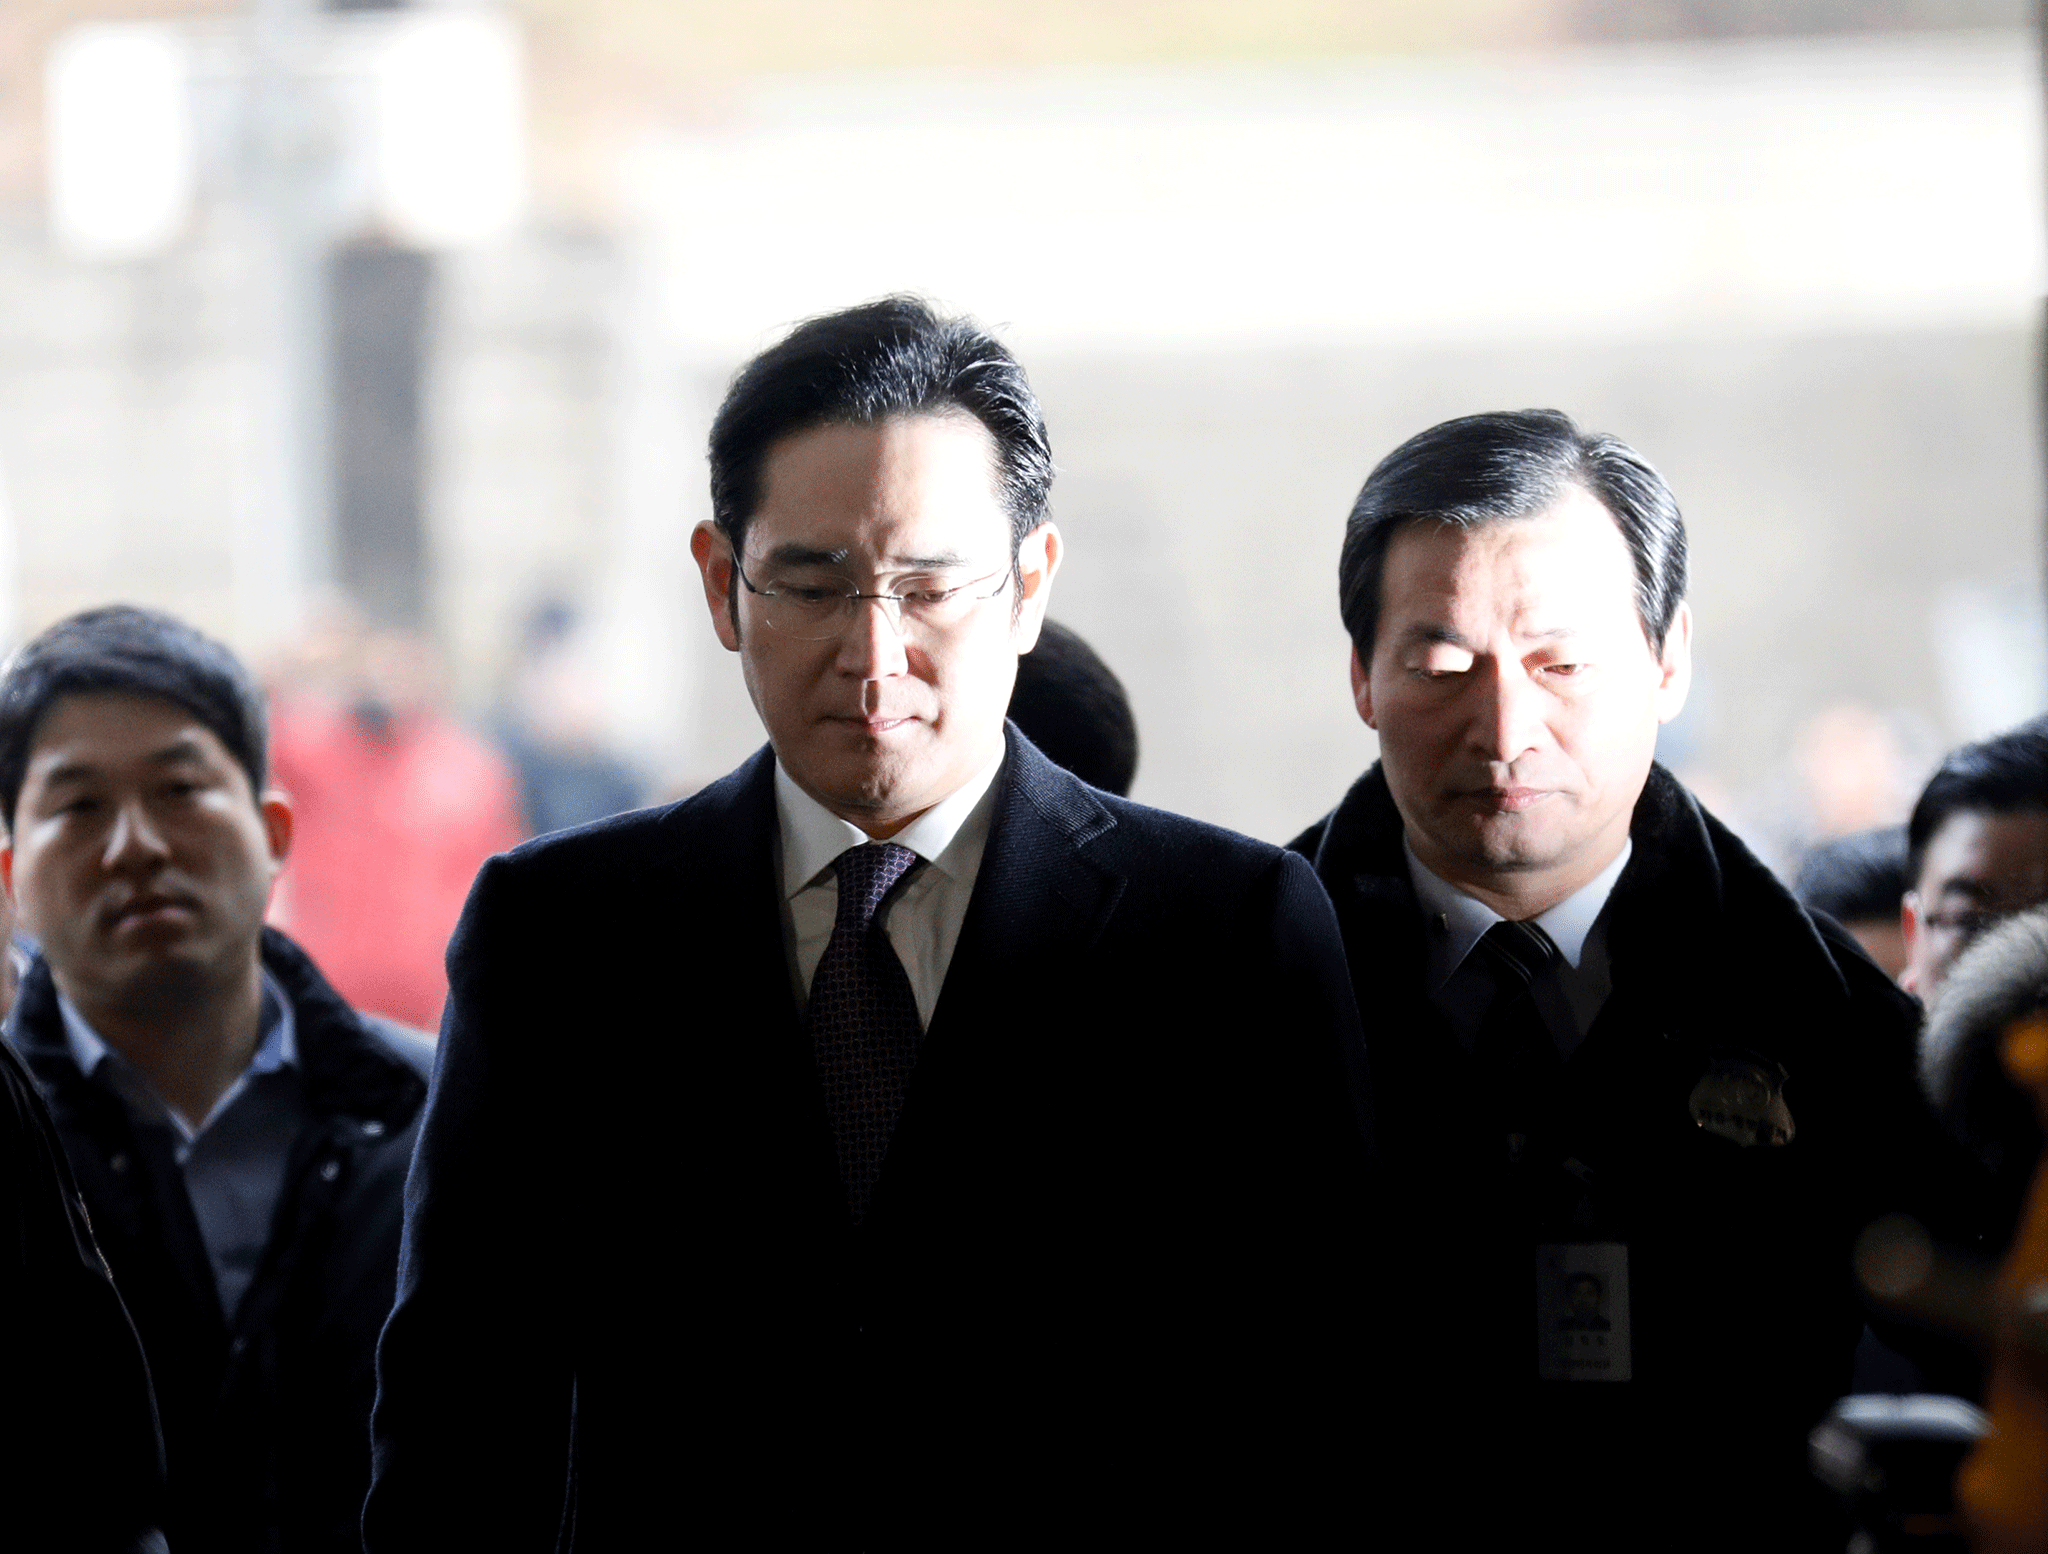 Samsung leader arrested for bribery and embezzlement as corruption ...